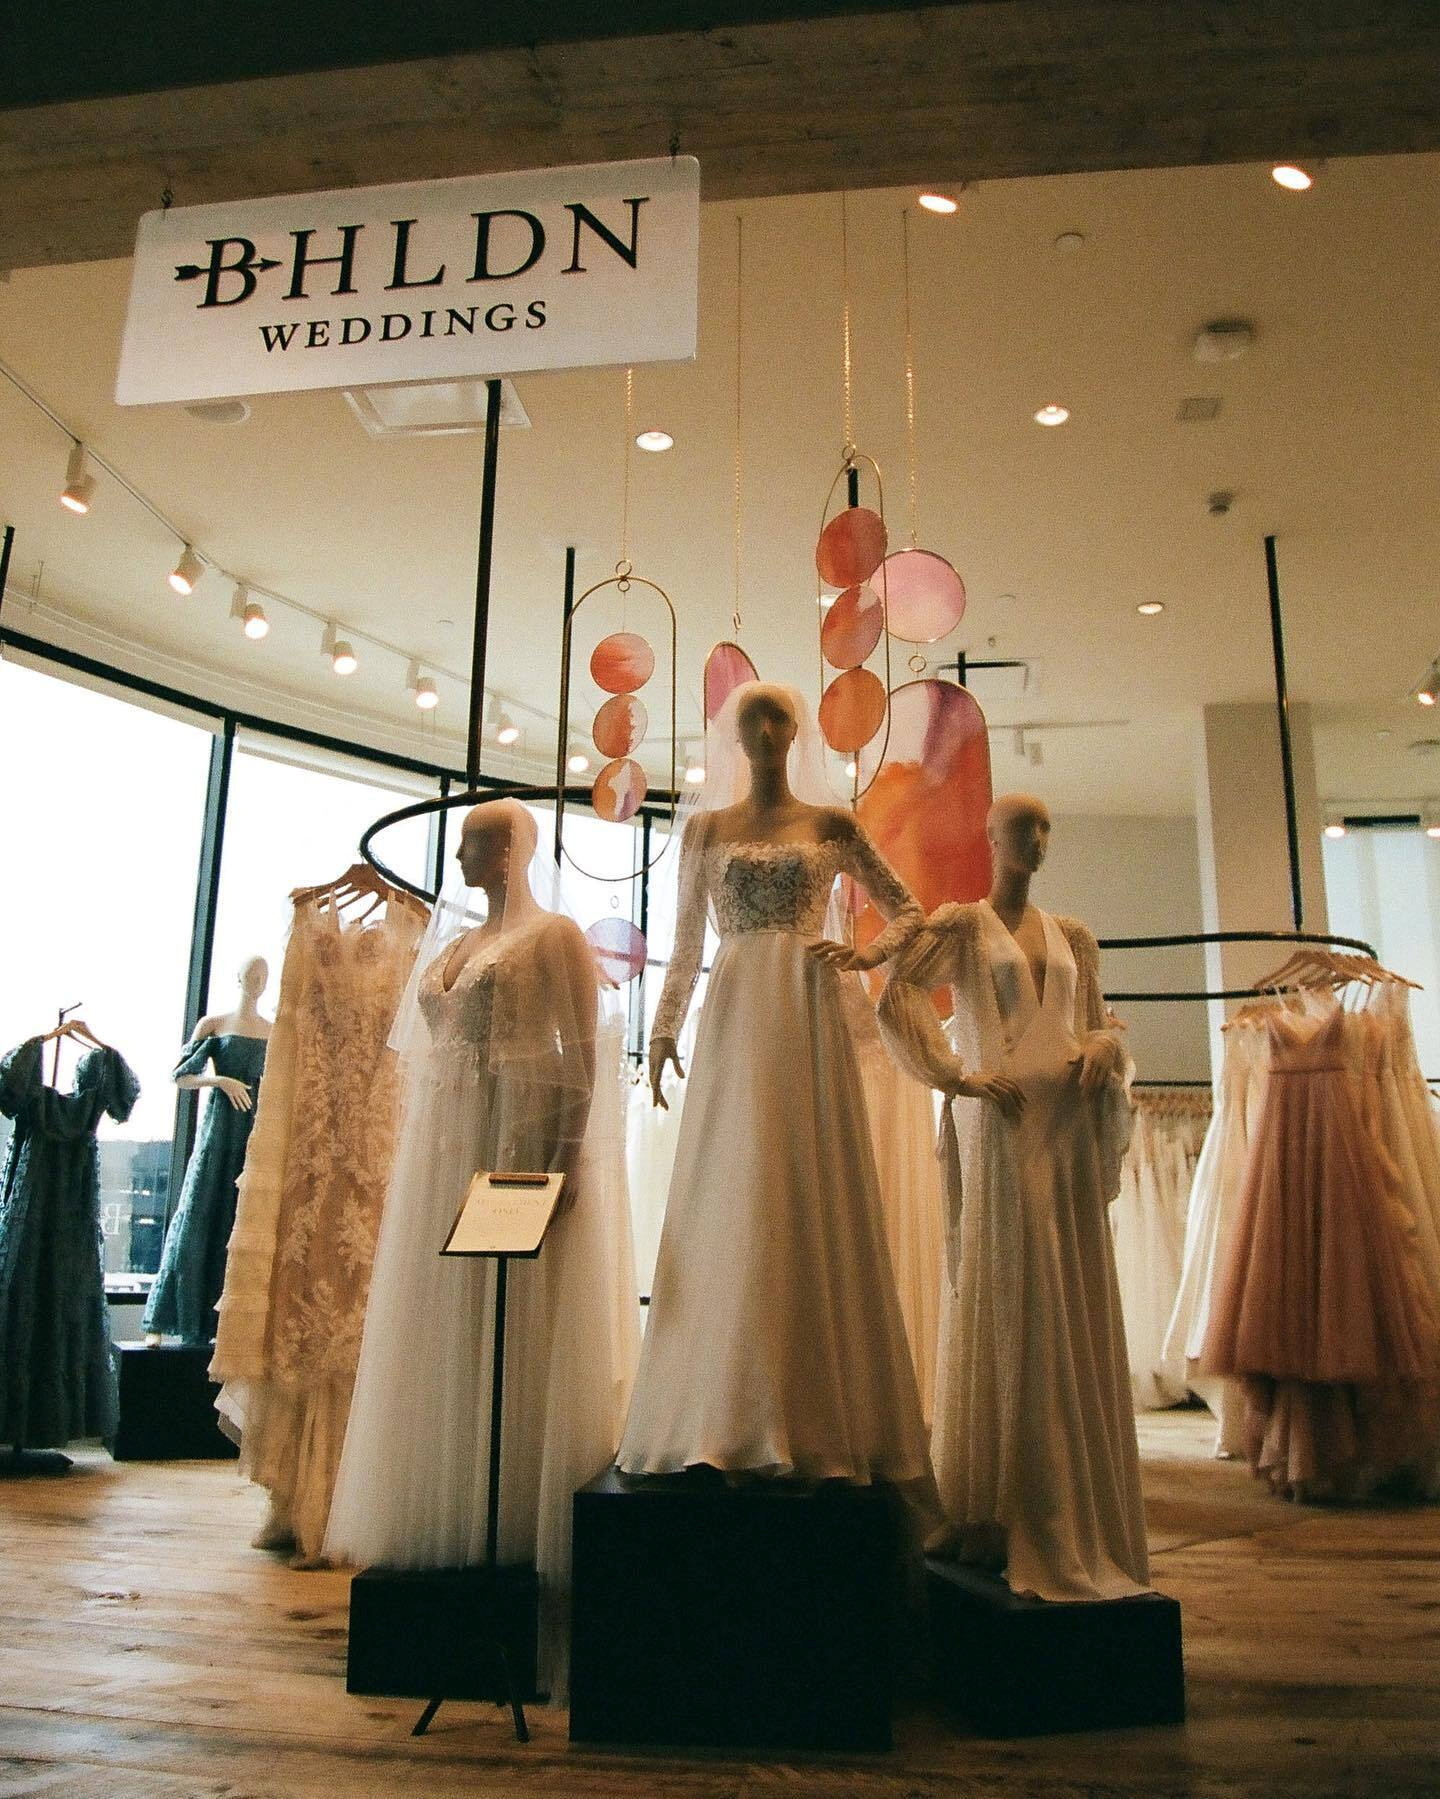 A range of wedding dresses are displayed at an Anthropologie store at BHLDN Century City, Los Angeles